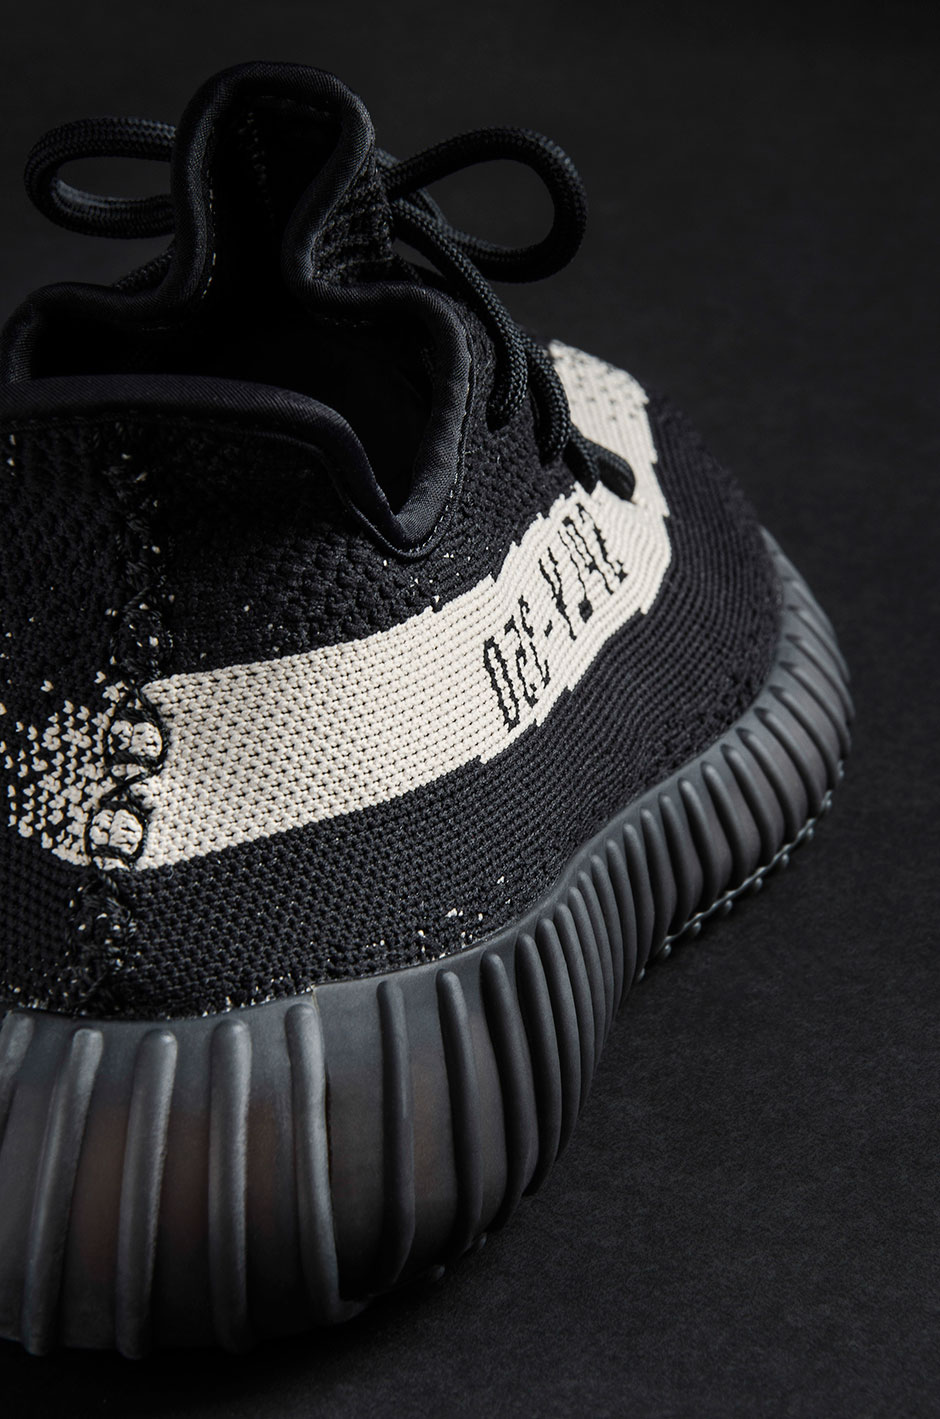 Cheap Adidas Yeezy Boost 350 V2 Black White Release Date